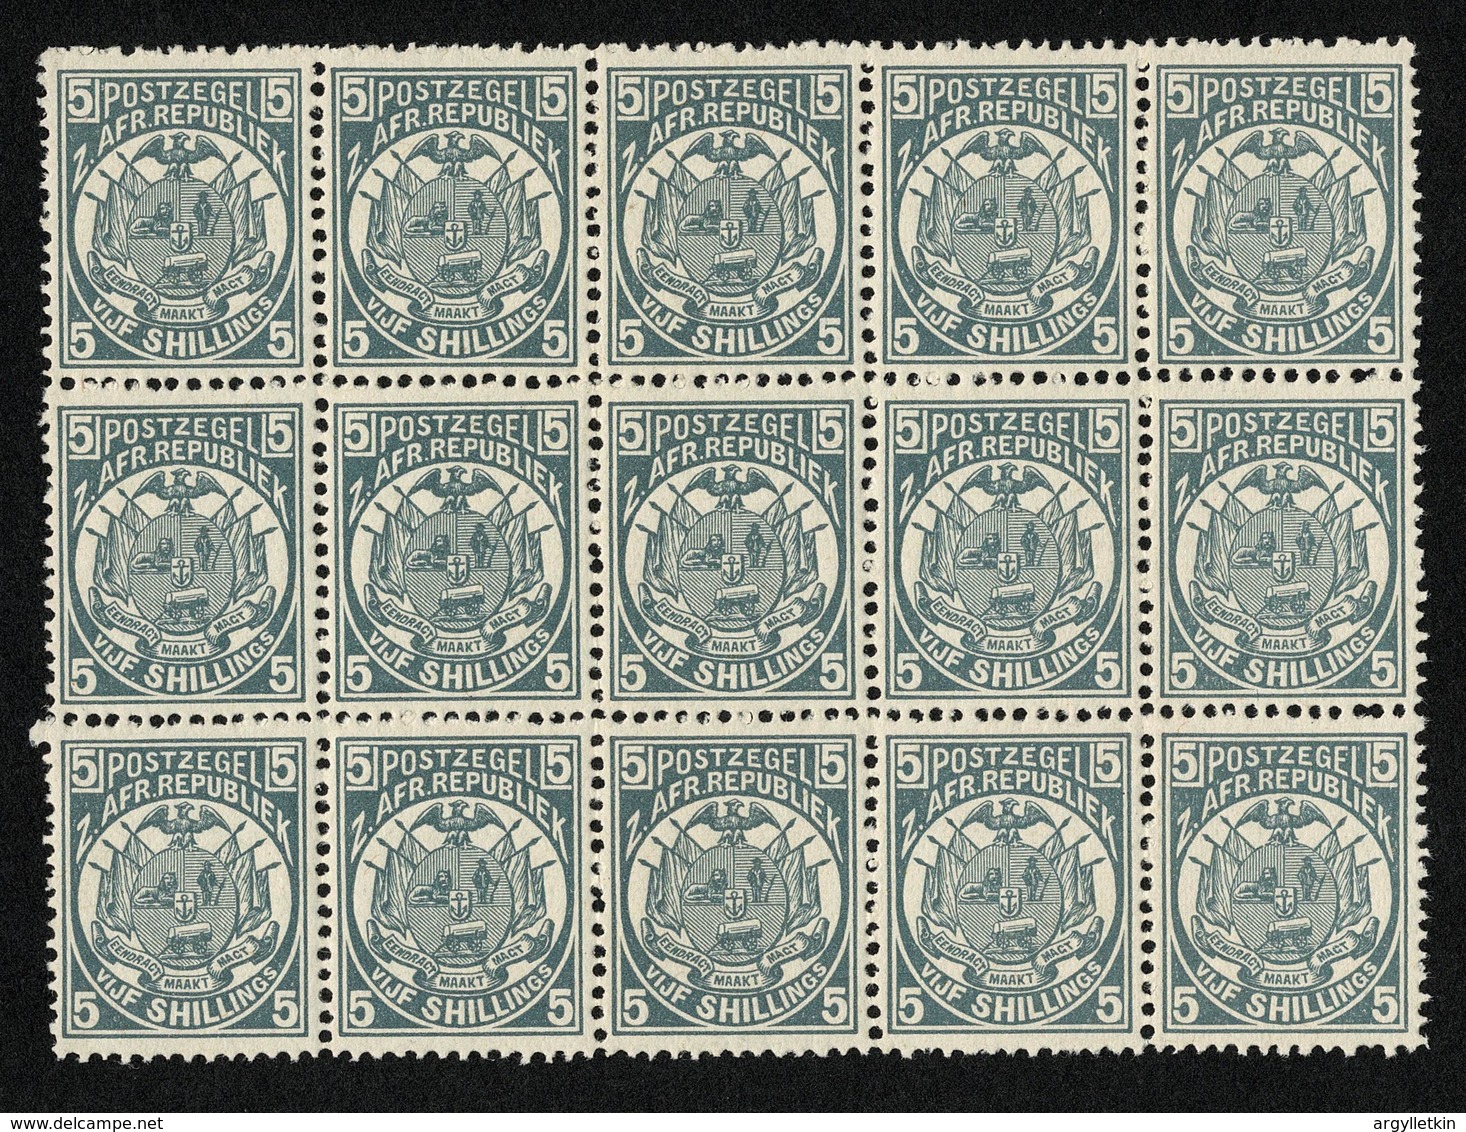 TRANSVAAL BLOCK OF 5 SHILLING STAMPS 1885 - Transvaal (1870-1909)